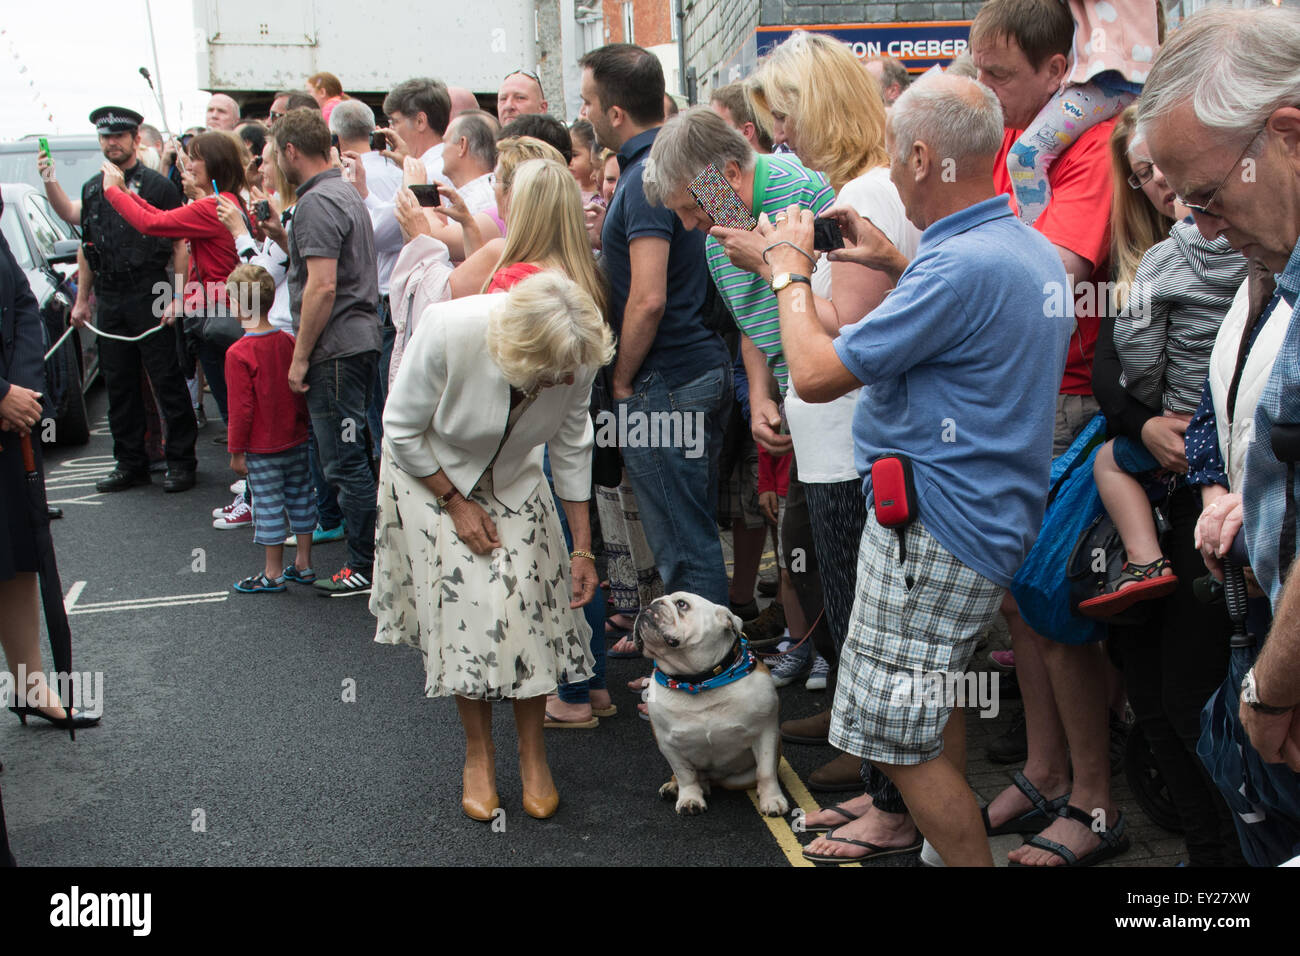 Padstow, Cornwall, UK. 20th July 2015. The Duke and Duchess of Cornwall starting their annual visit to the Duchy at Padstow. Credit:  Simon Maycock/Alamy Live News Stock Photo